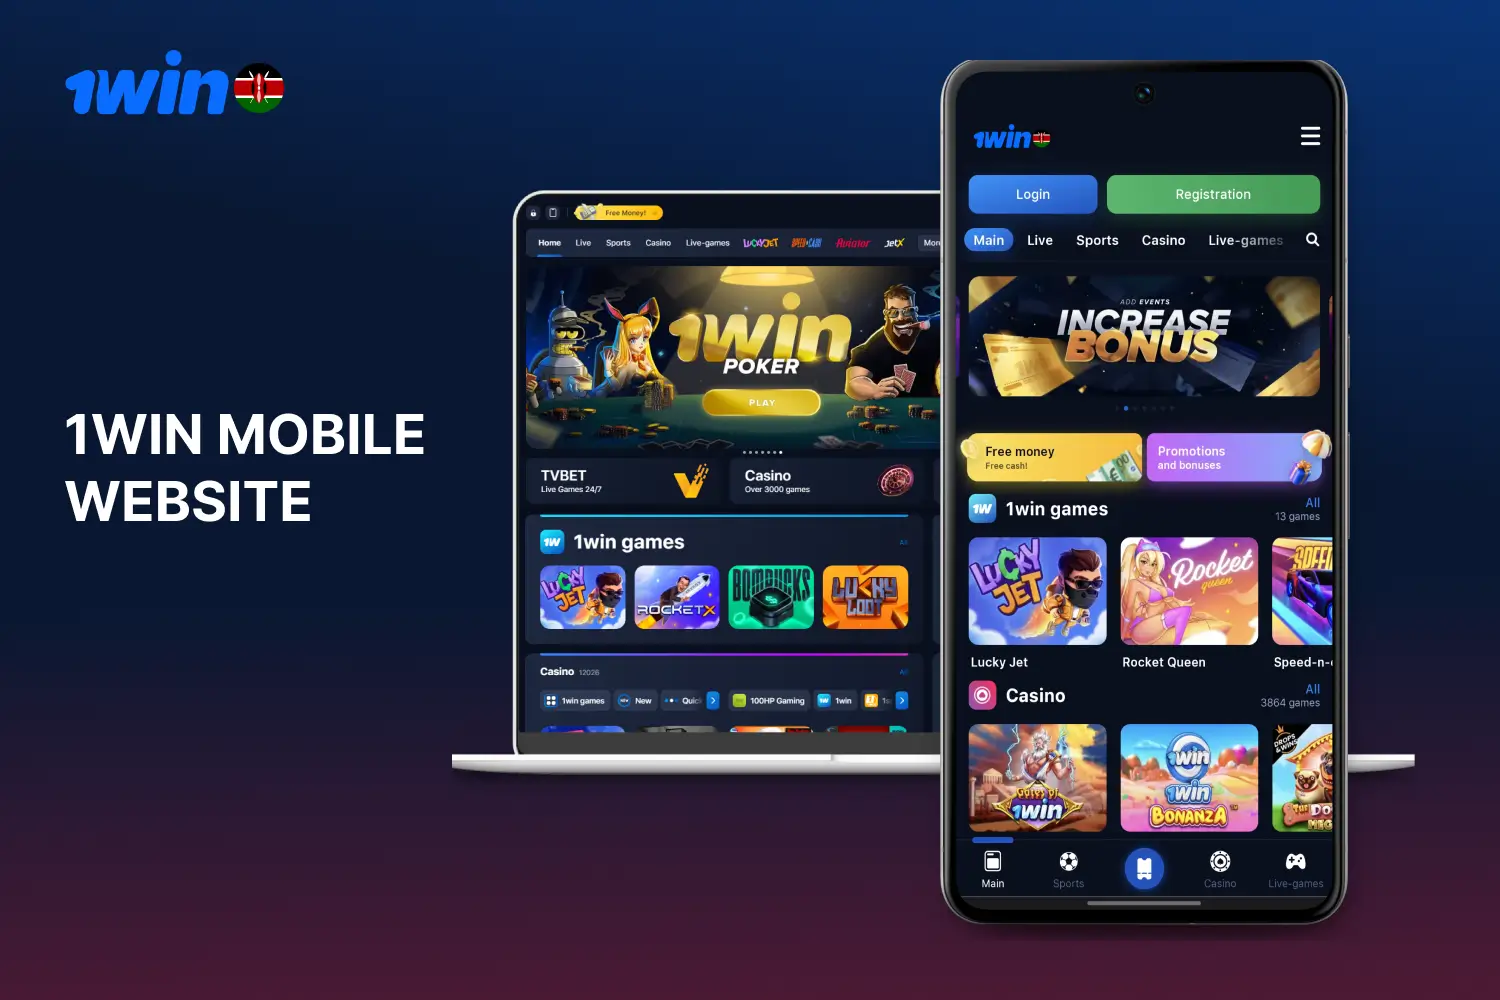 Kenyan players can use the mobile version of the 1win website for betting and casino games